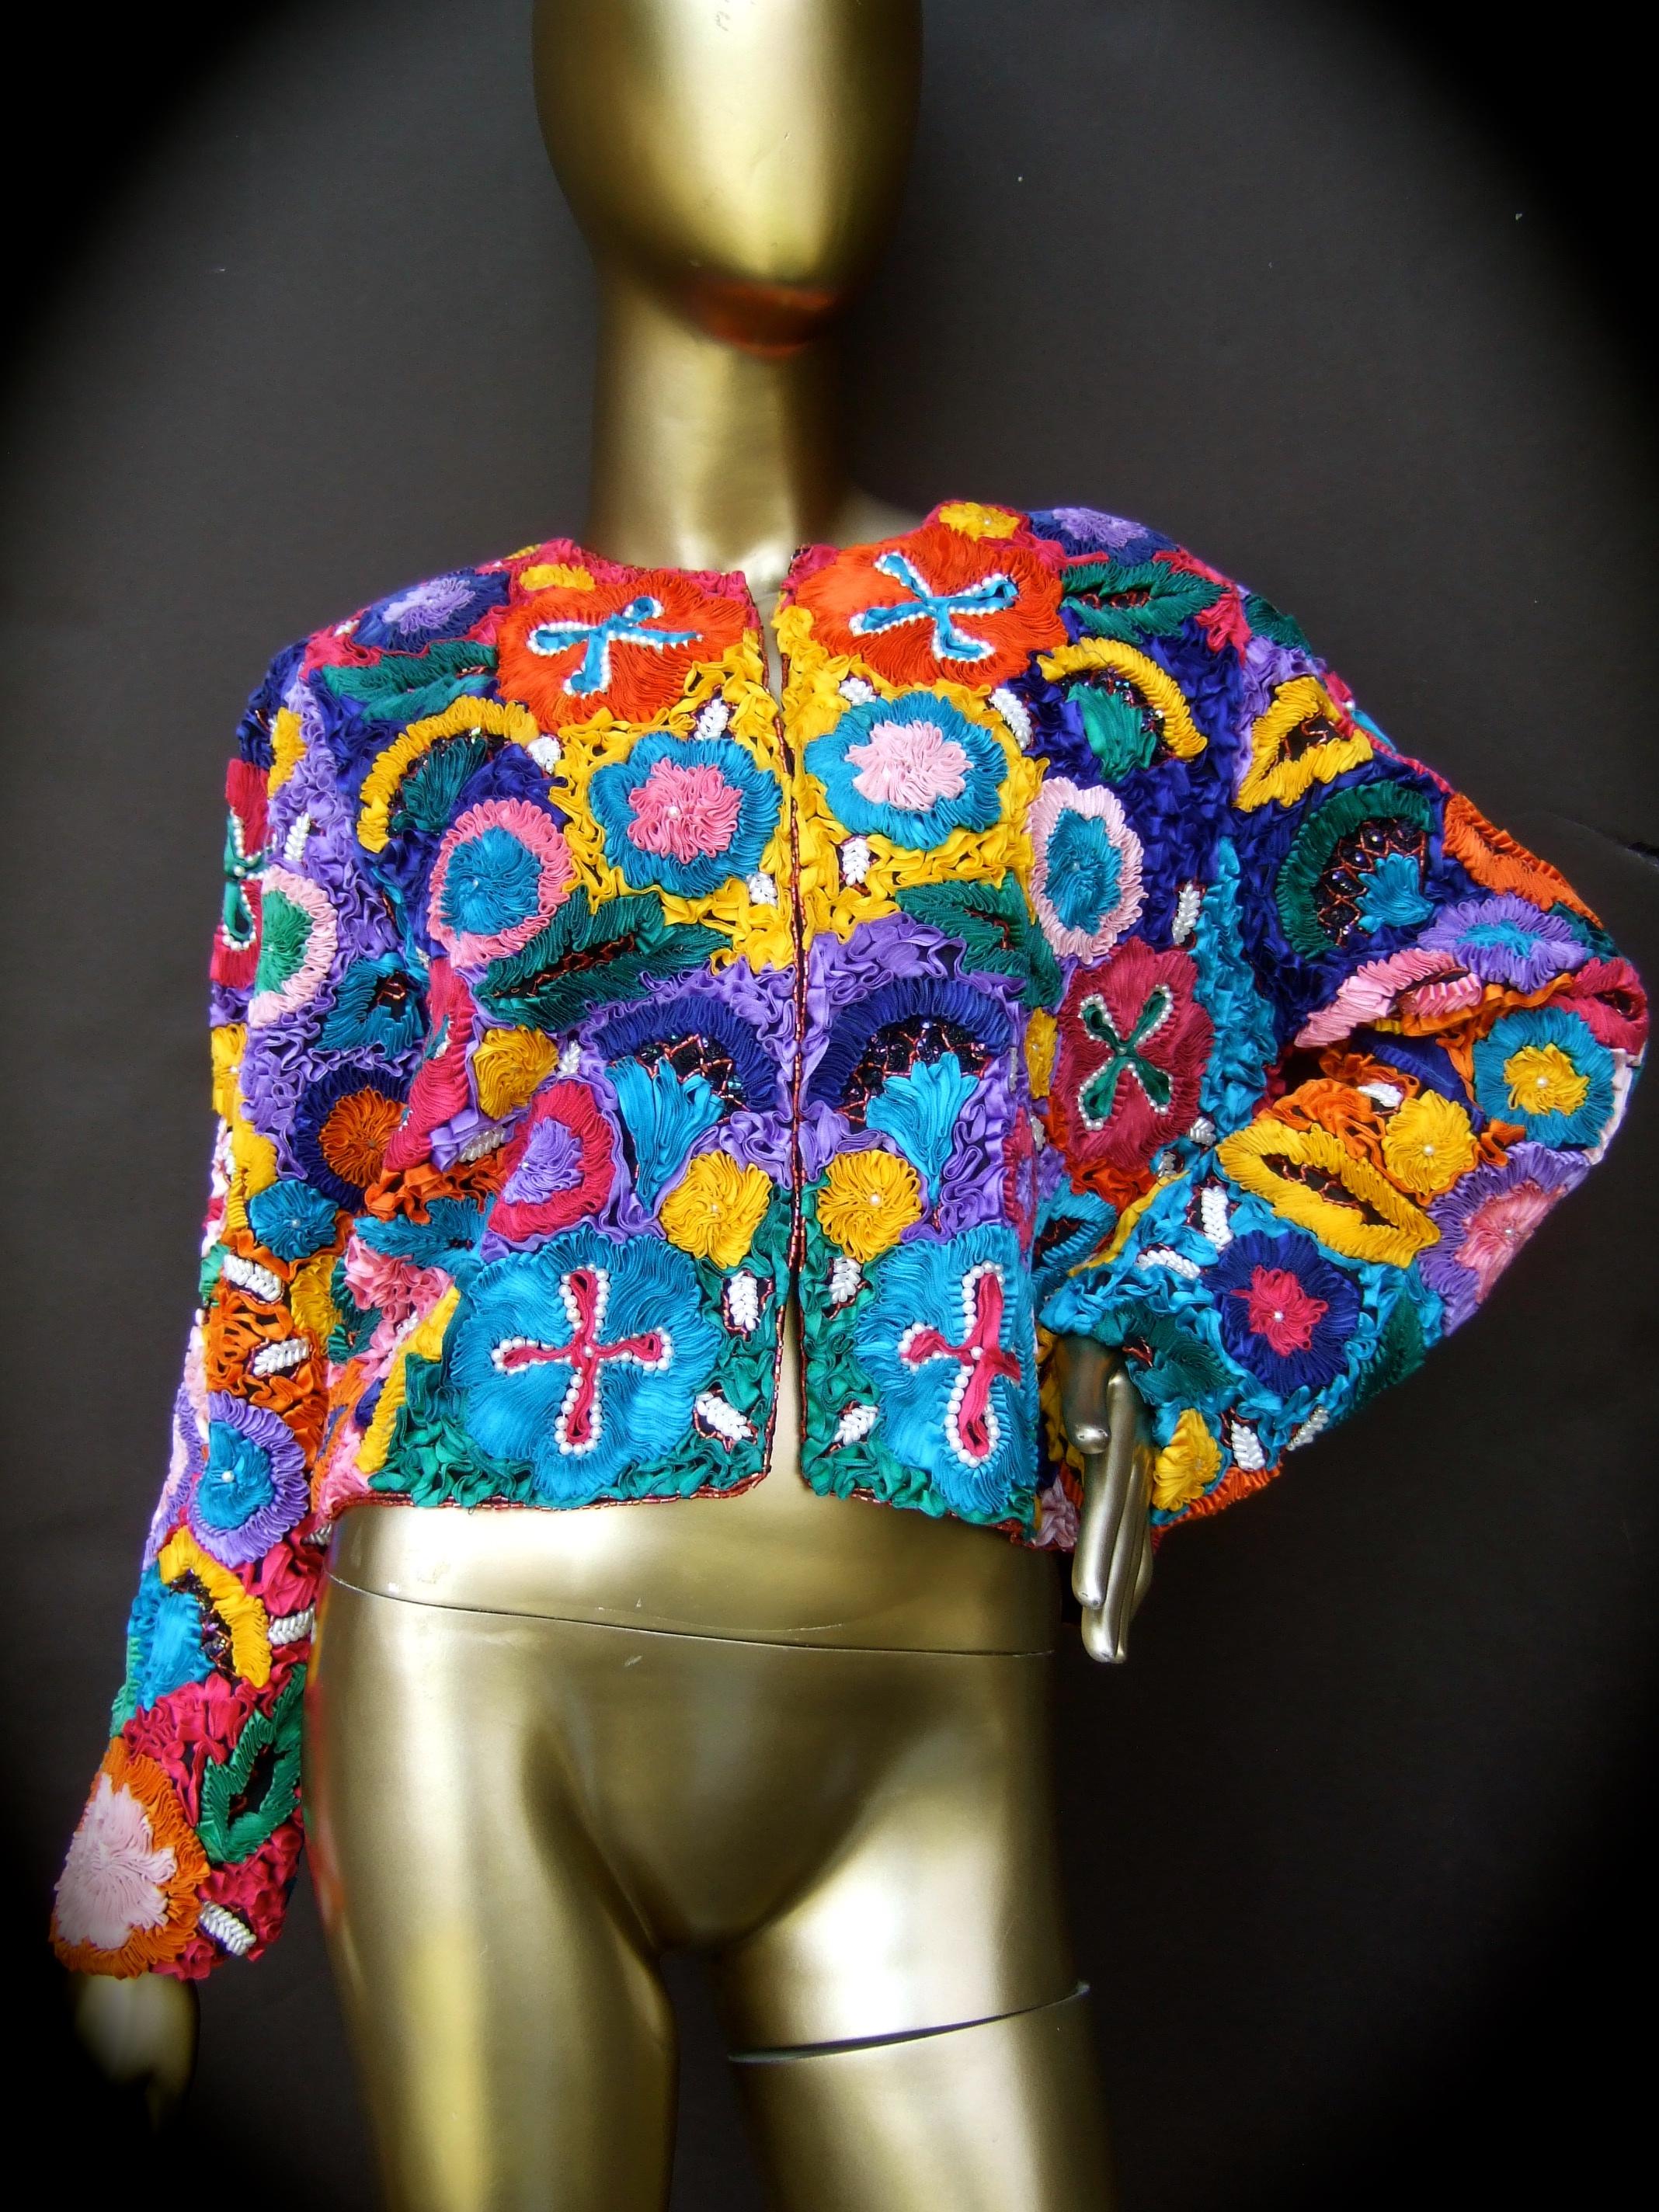 Neiman Marcus avant-garde pastel silk ribbon boxy bolero style jacket c 1990s
The unique jacket is designed with elaborate pastel silk pleated ribbon detail
in a myriad of vibrant  eye-catching colors 

The intricate ribbons have the texture of